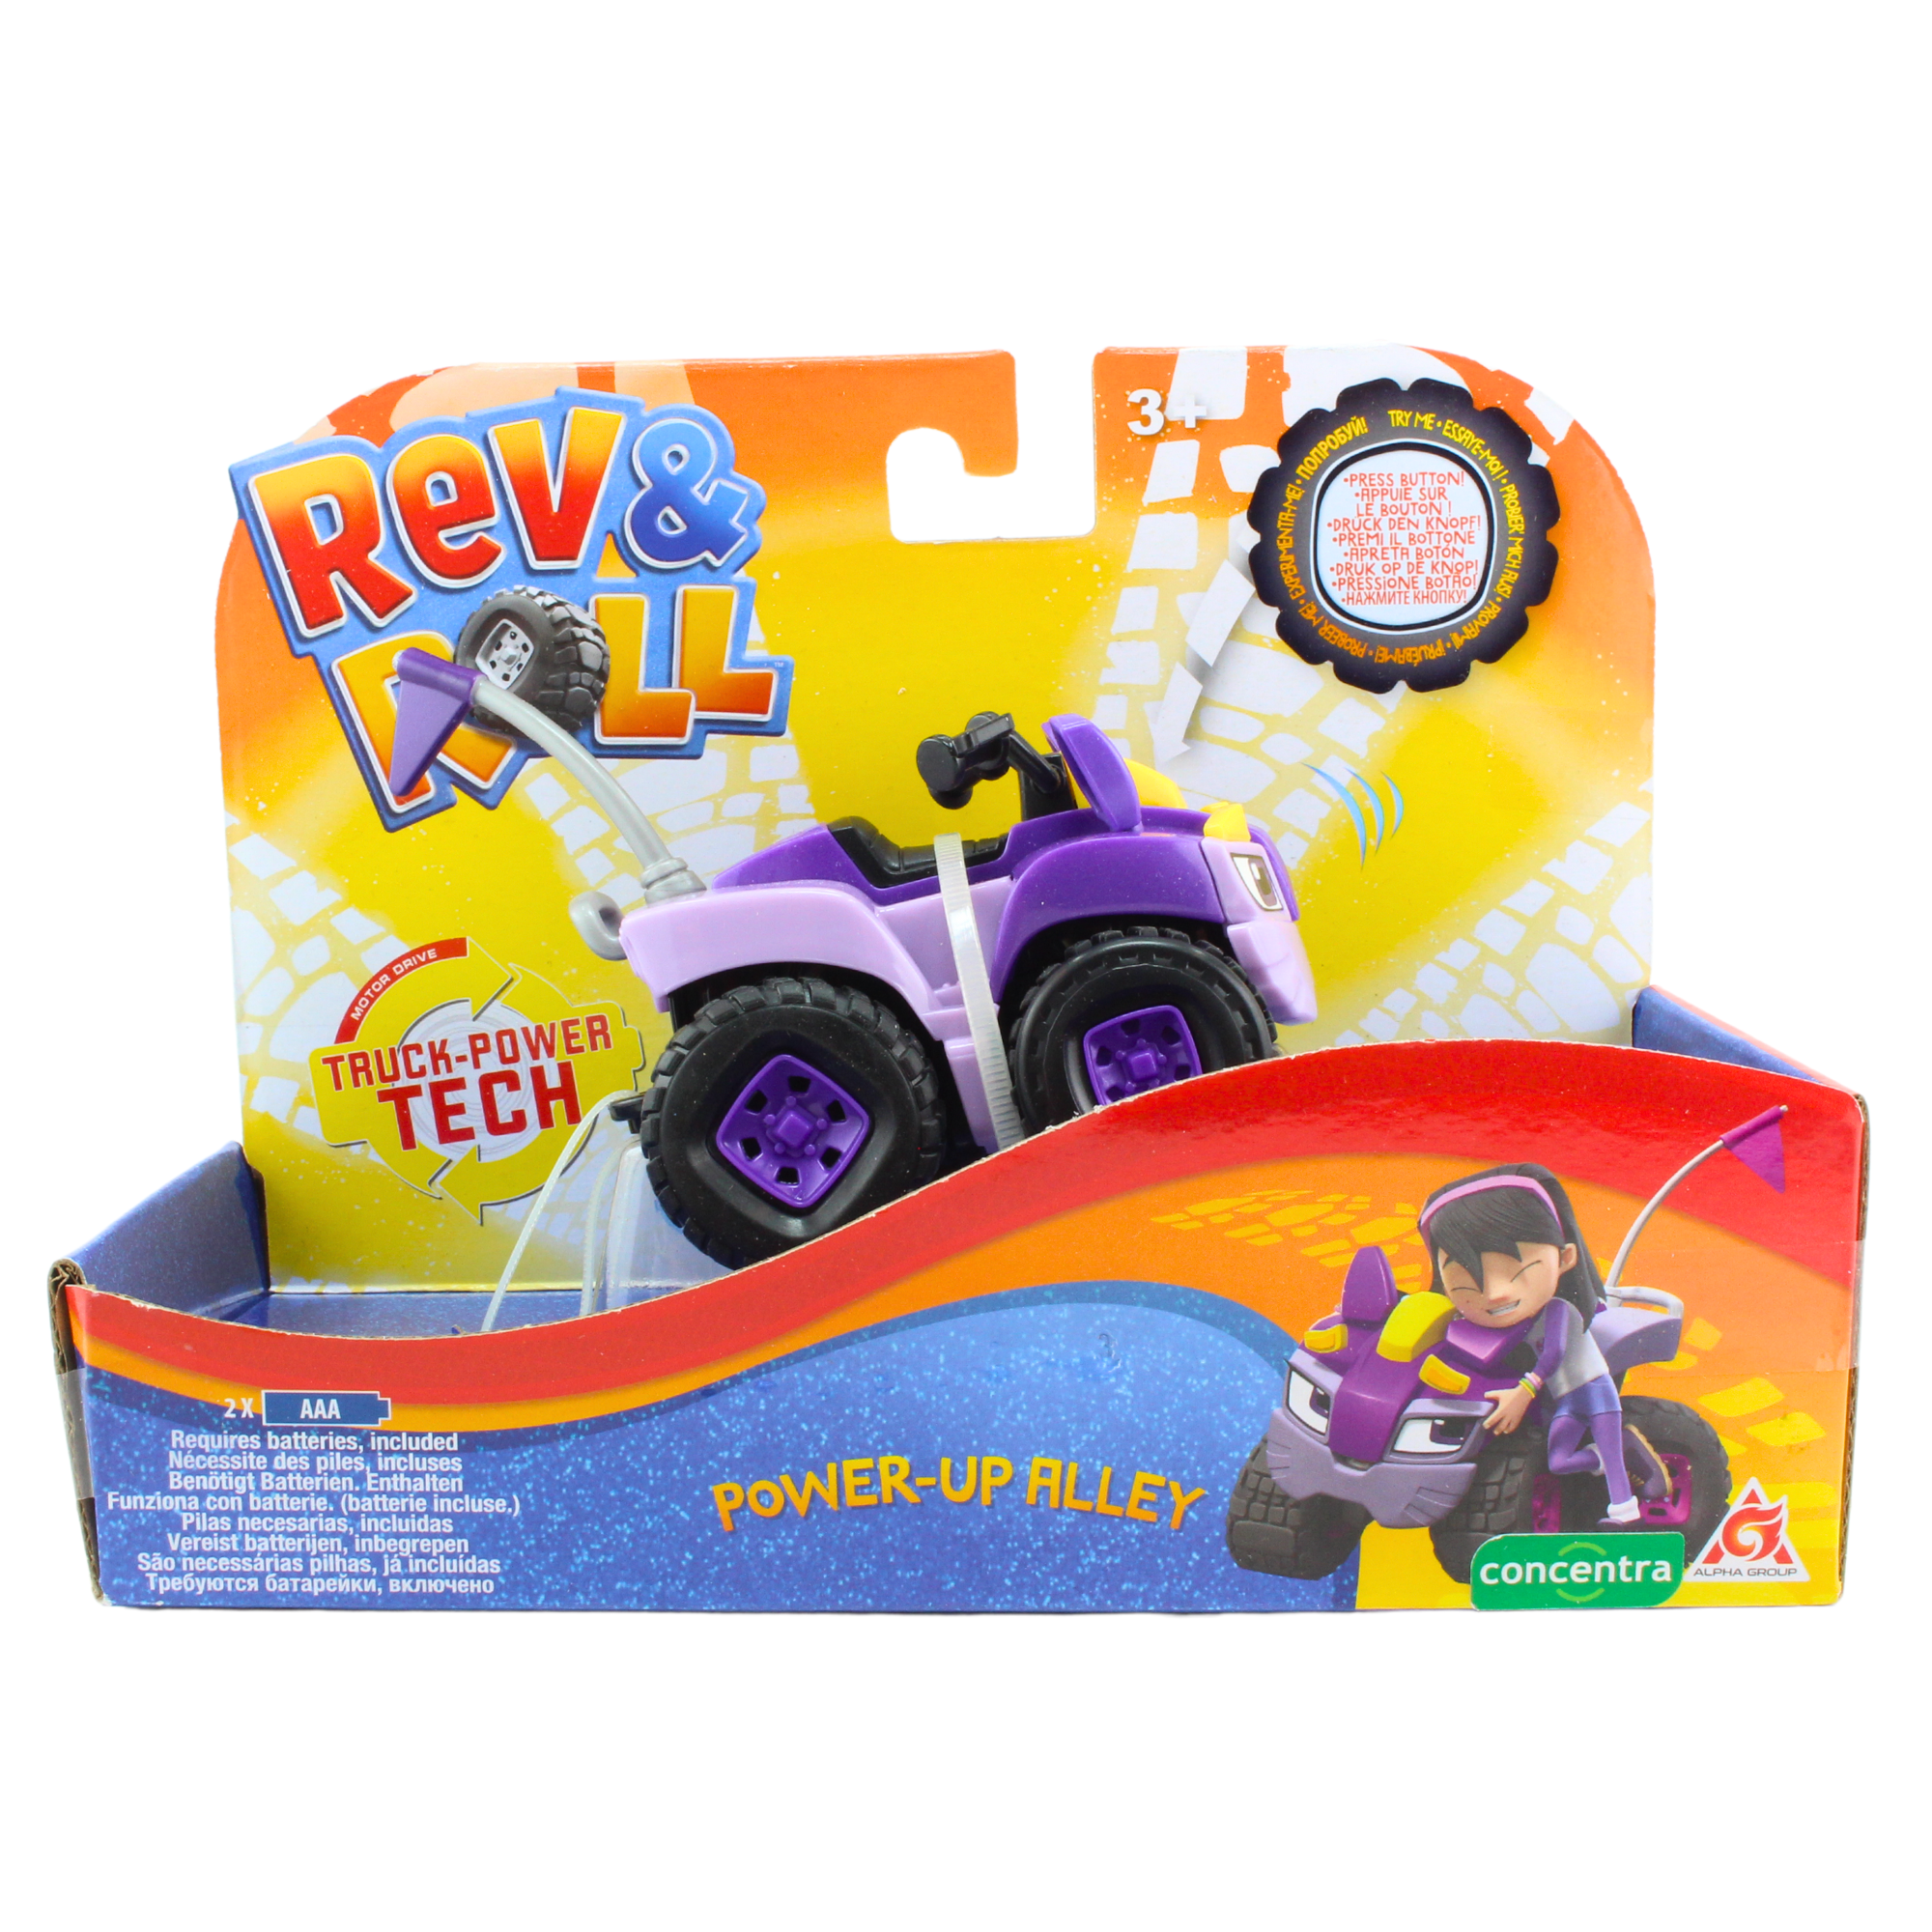 Rev and Roll Power Up Motorised Toy Vehicle - Power-Up Alley